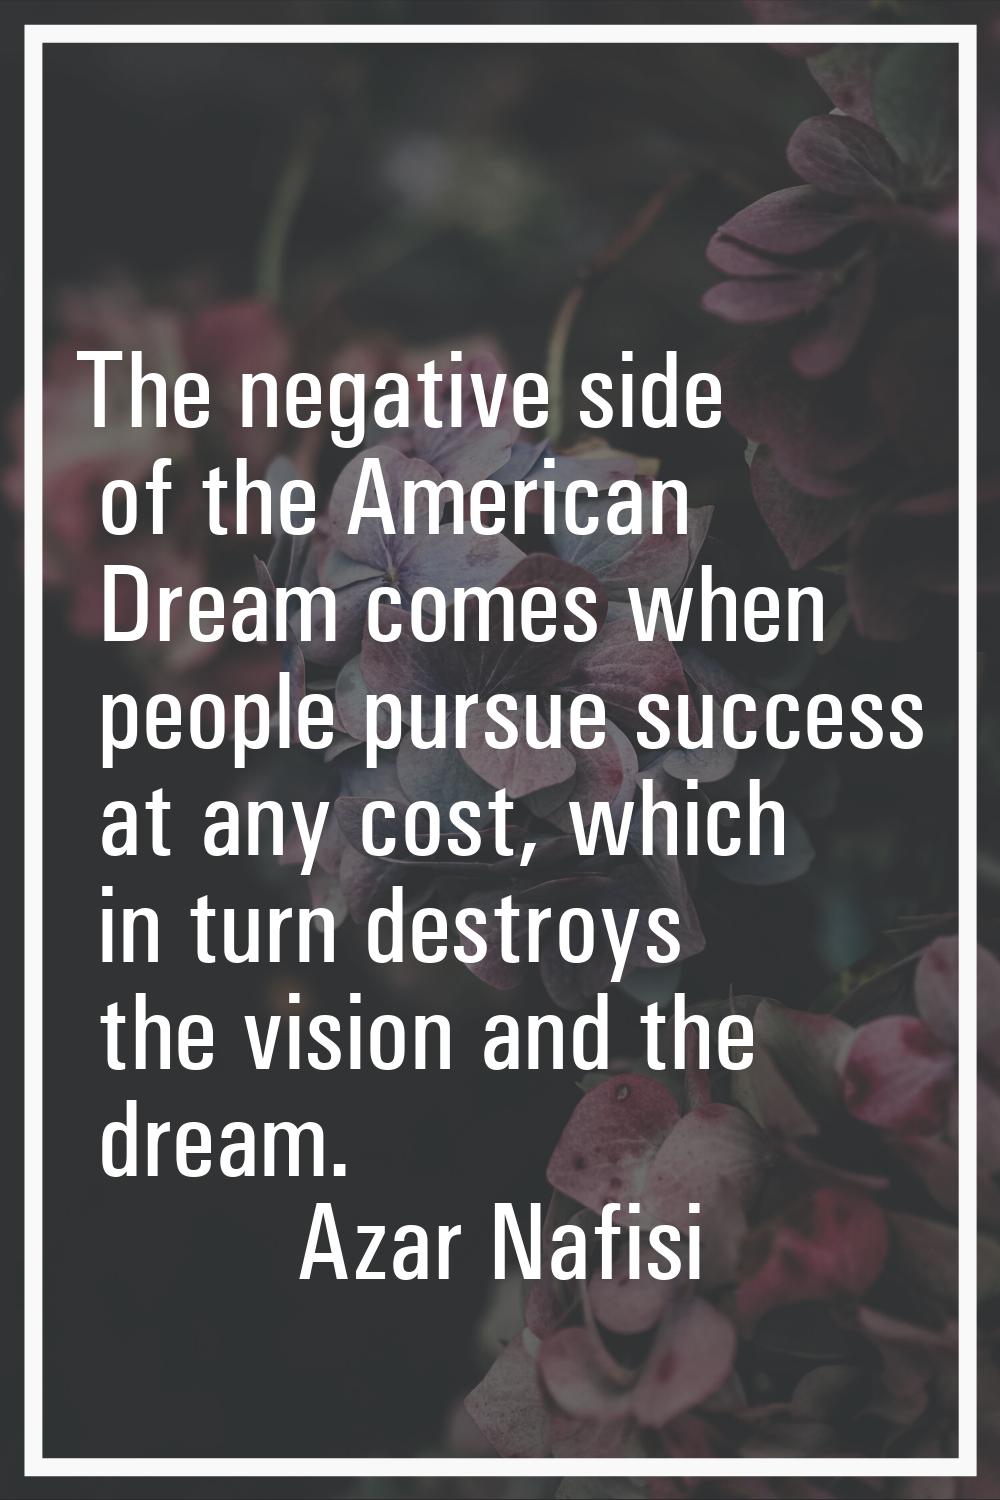 The negative side of the American Dream comes when people pursue success at any cost, which in turn